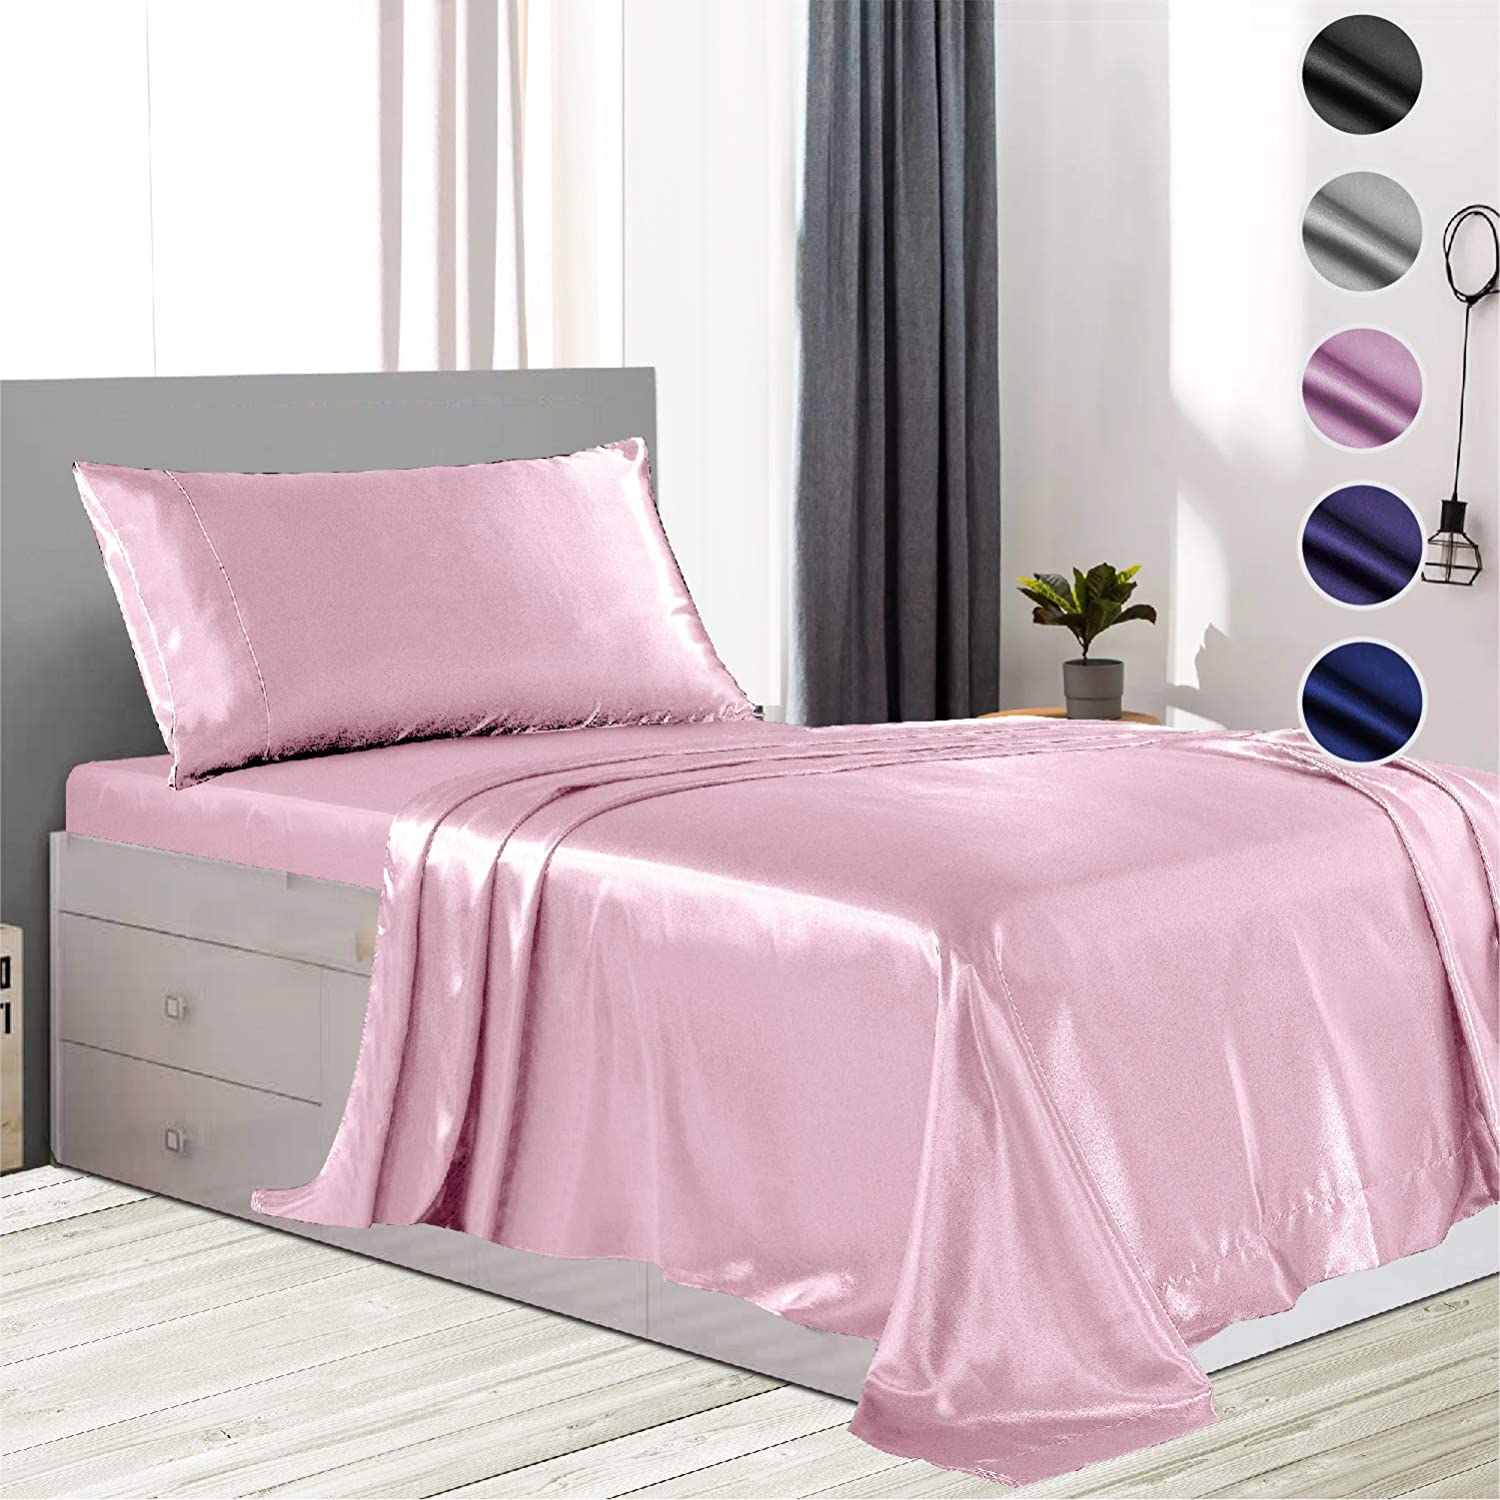 Satin Sheets Queen Size (4 Pieces, 5 Colors), Silky Satin Sheet Set -Satin  Bed S | eBay